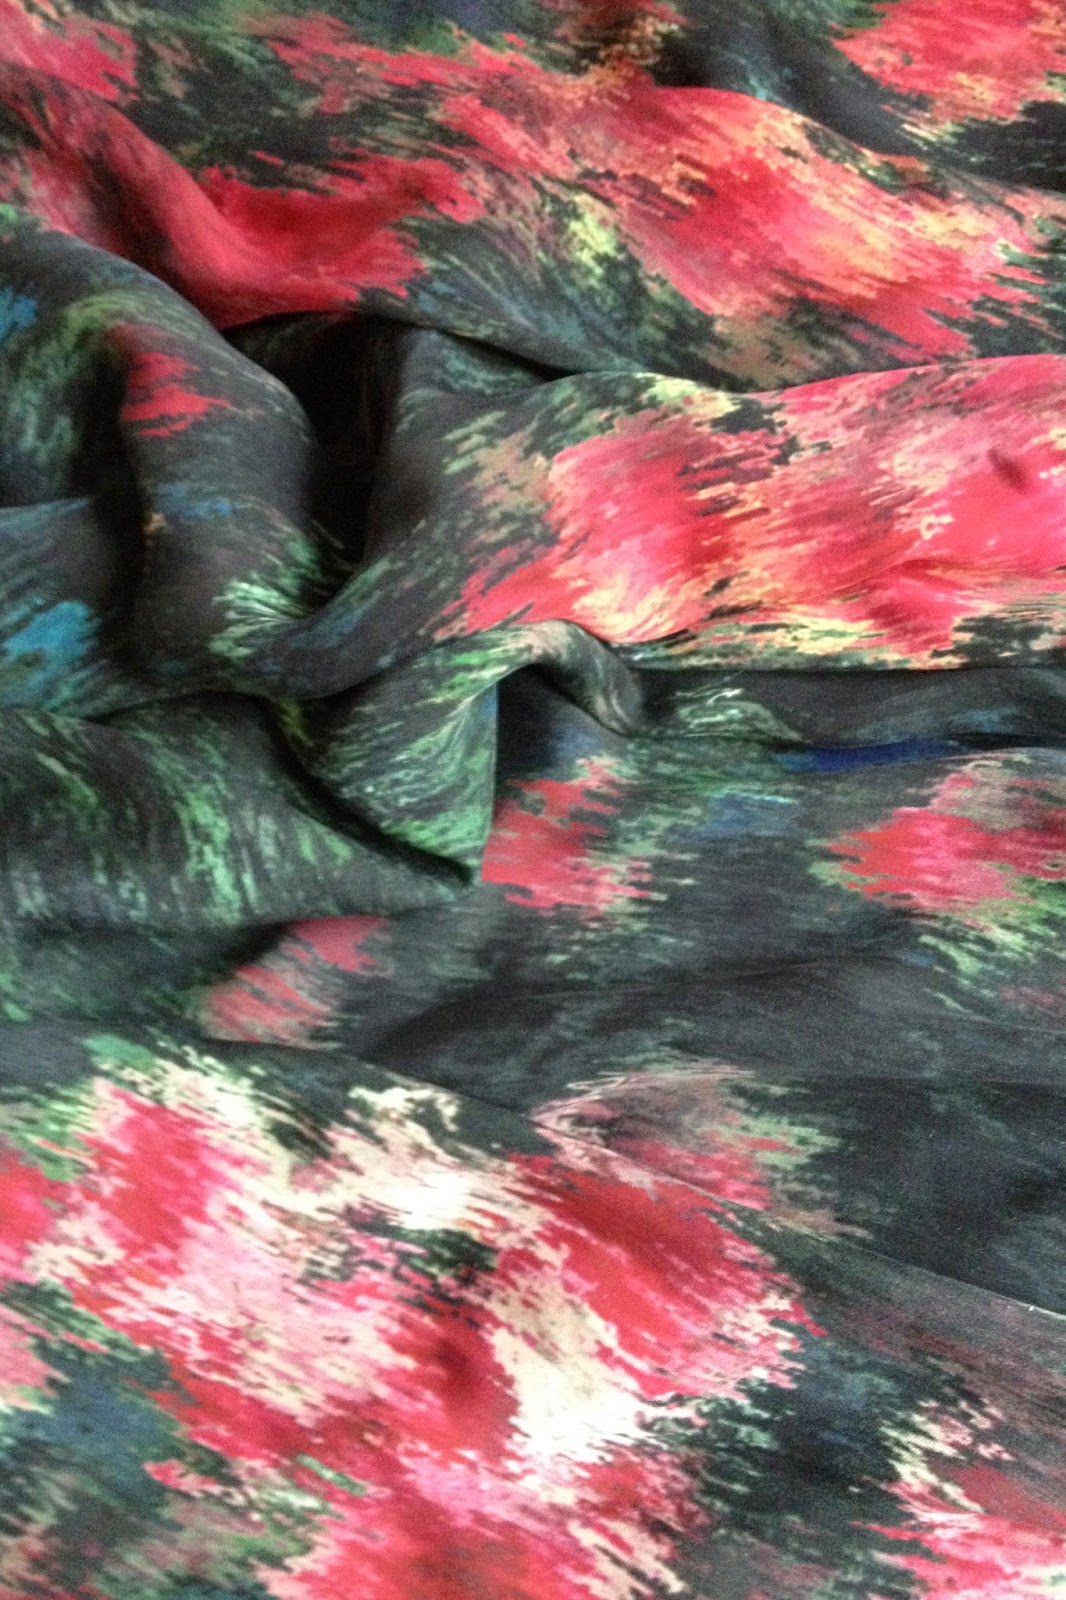 Diary of a Chain Stitcher: Printed Silk Maxi Skirt and Bamboo Jersey Bodysuit with Mood Fabrics